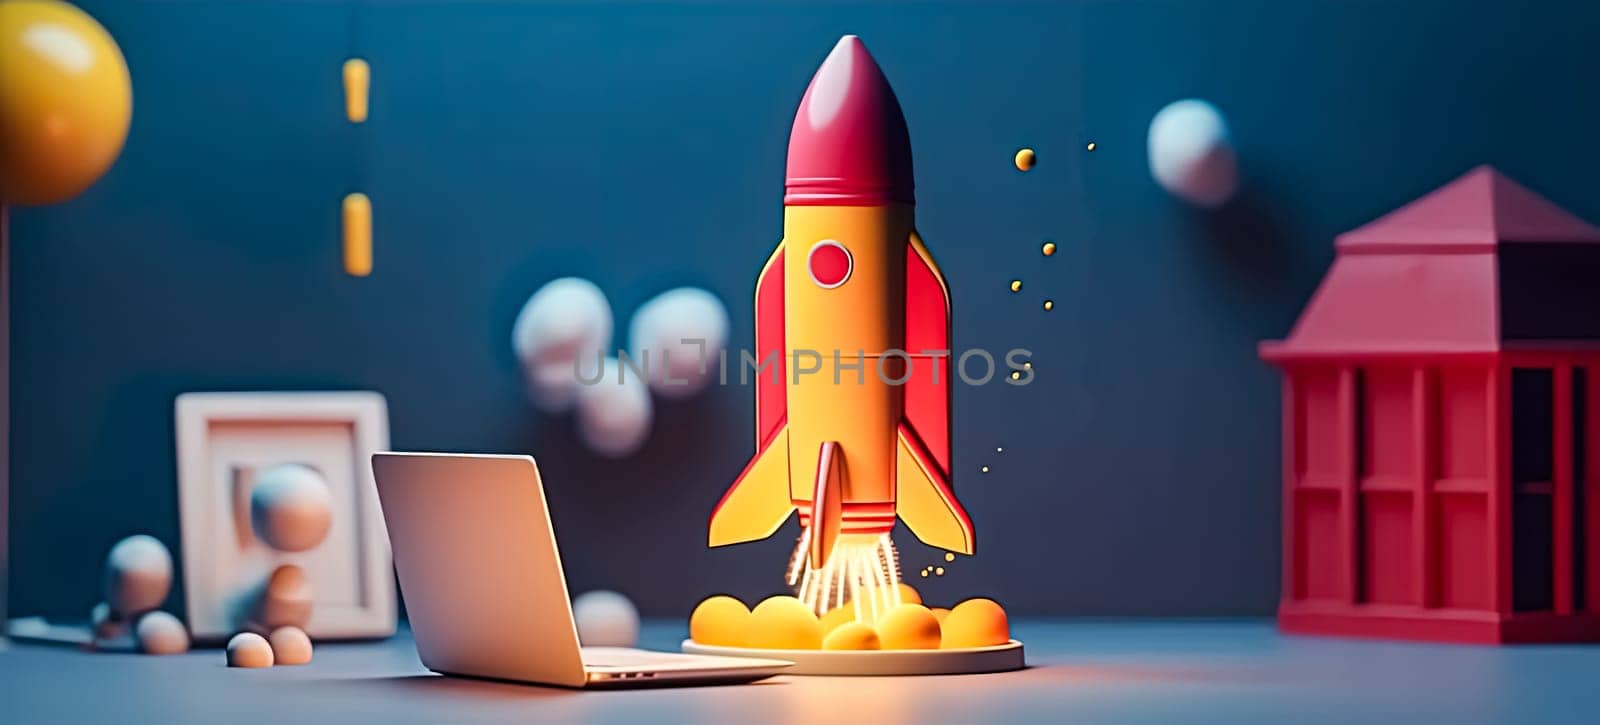 Rocket launch ship business product concept illustration. Standard visual capturing the idea of a product launching into the market.